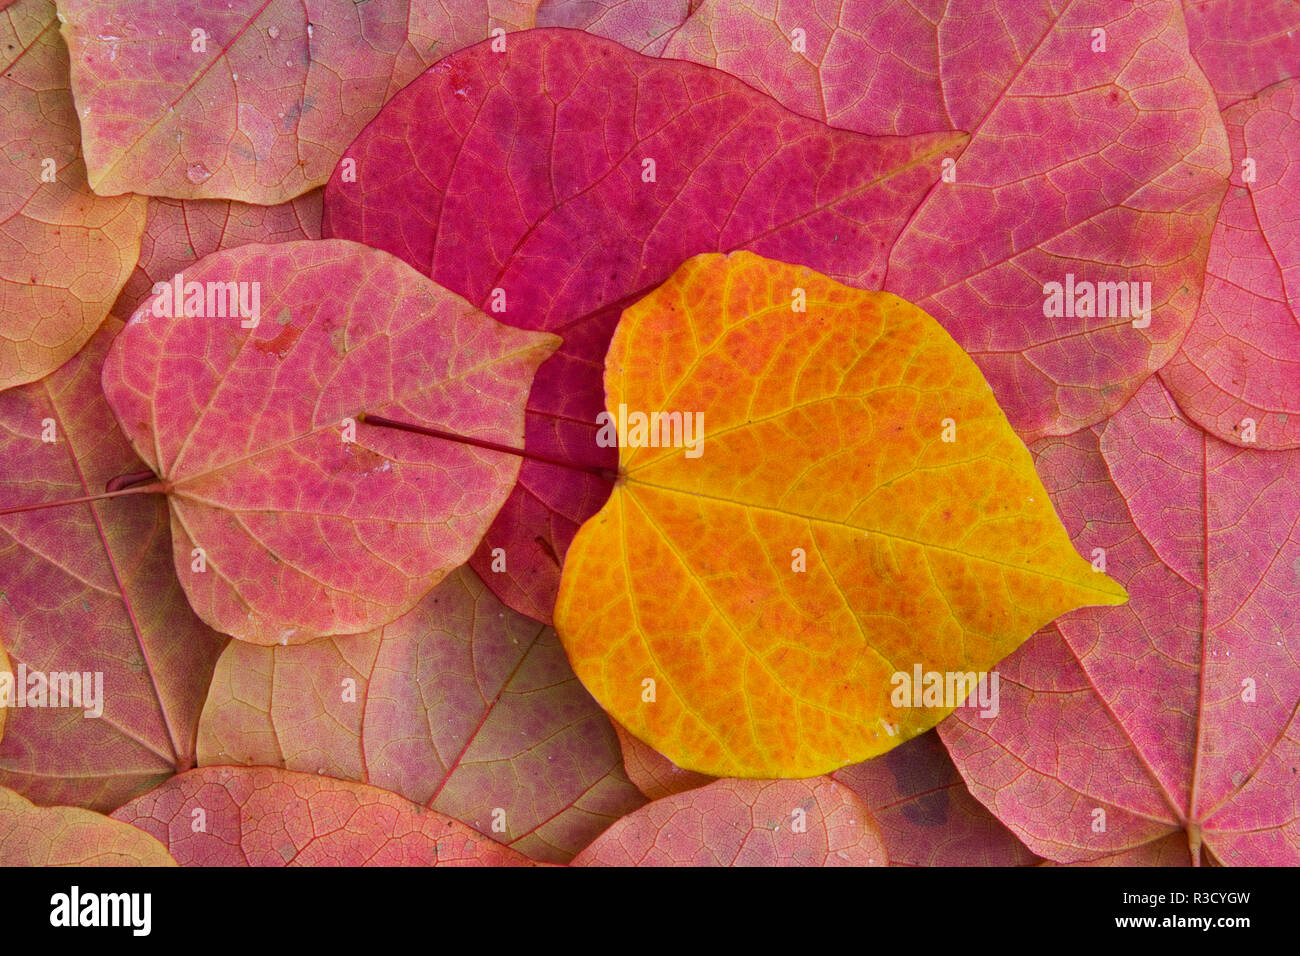 Pattern of fallen Rosebud leaves with Autumn colors Stock Photo